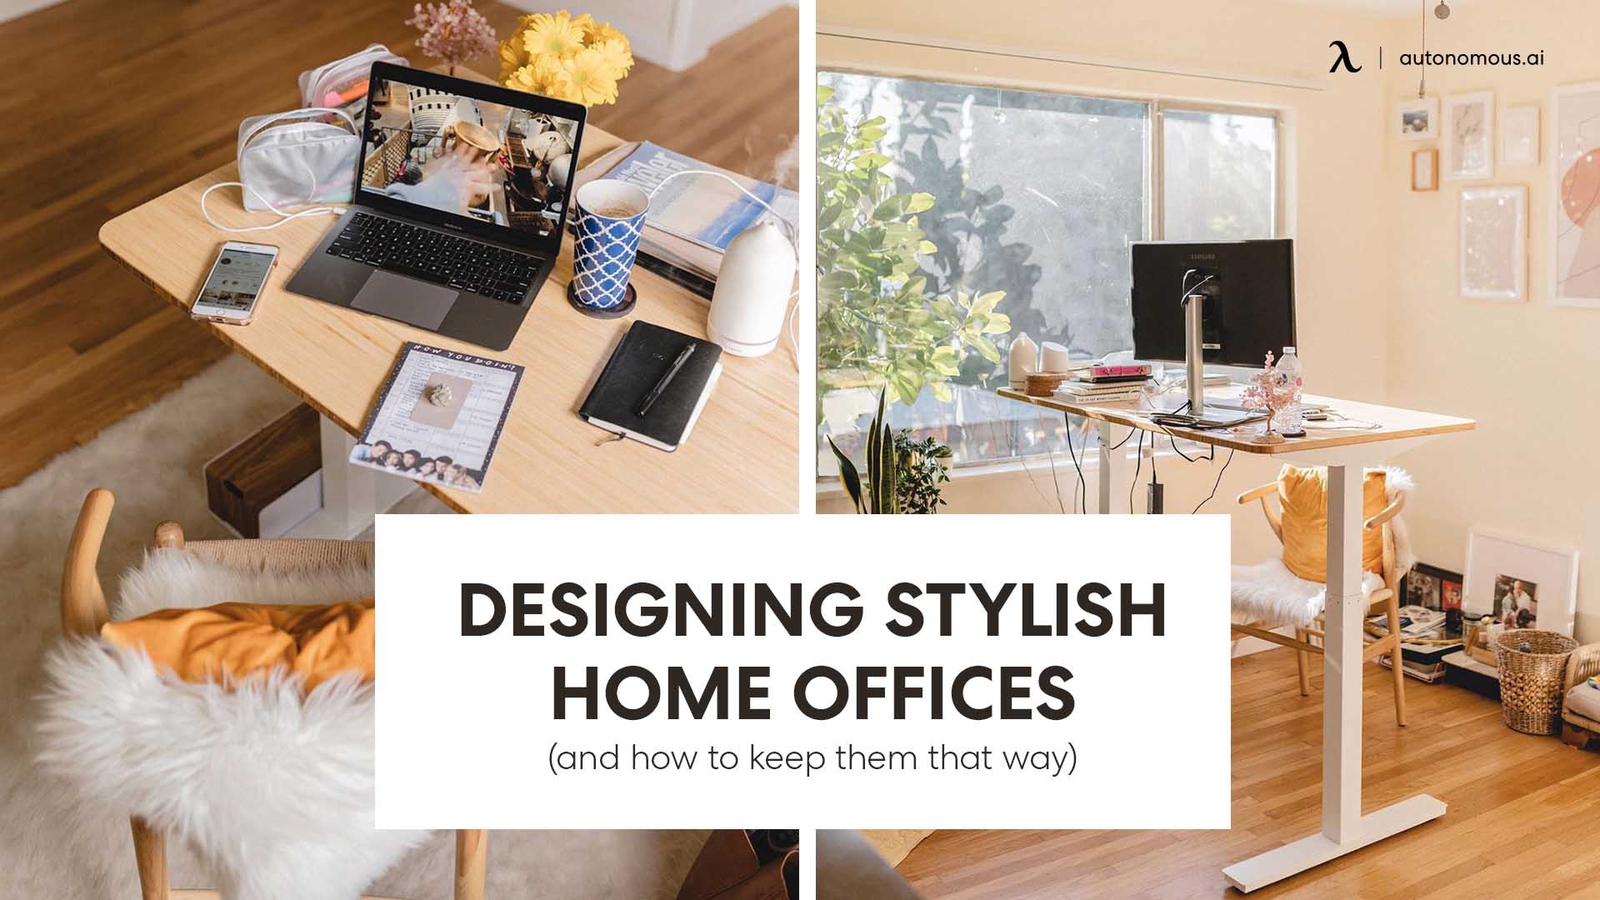 9 Tips for Designing Stylish Home Office and How to Keep Them That Way